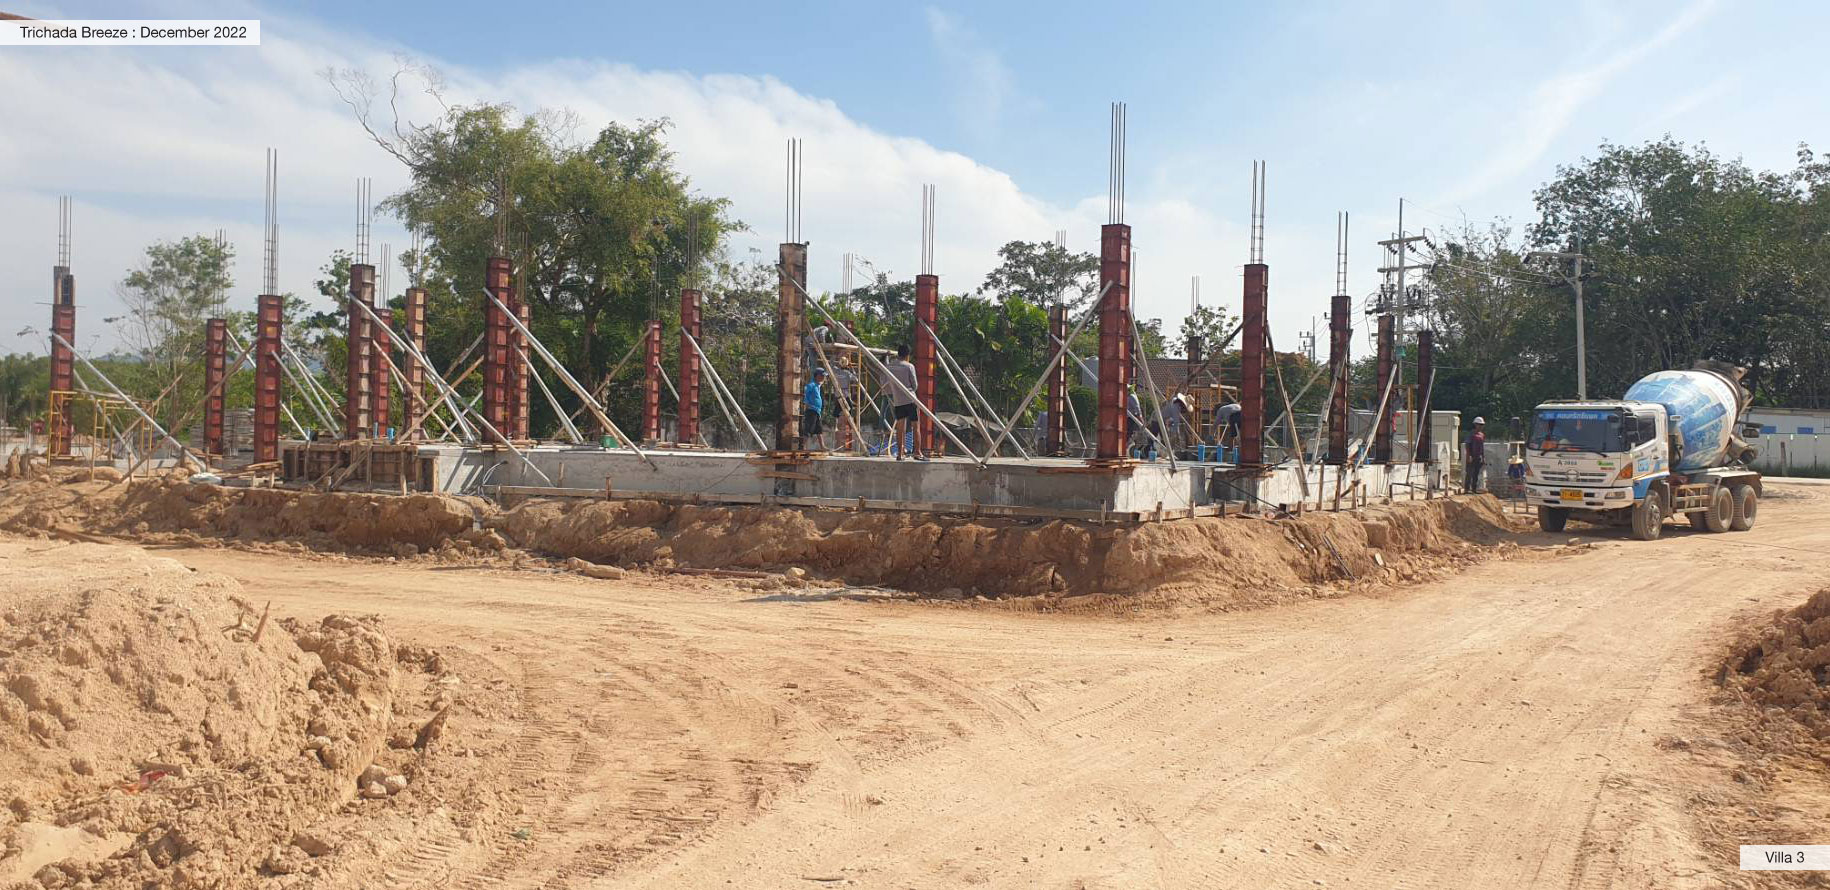 Early stage construction of a Trichada Breeze, Dec 2022